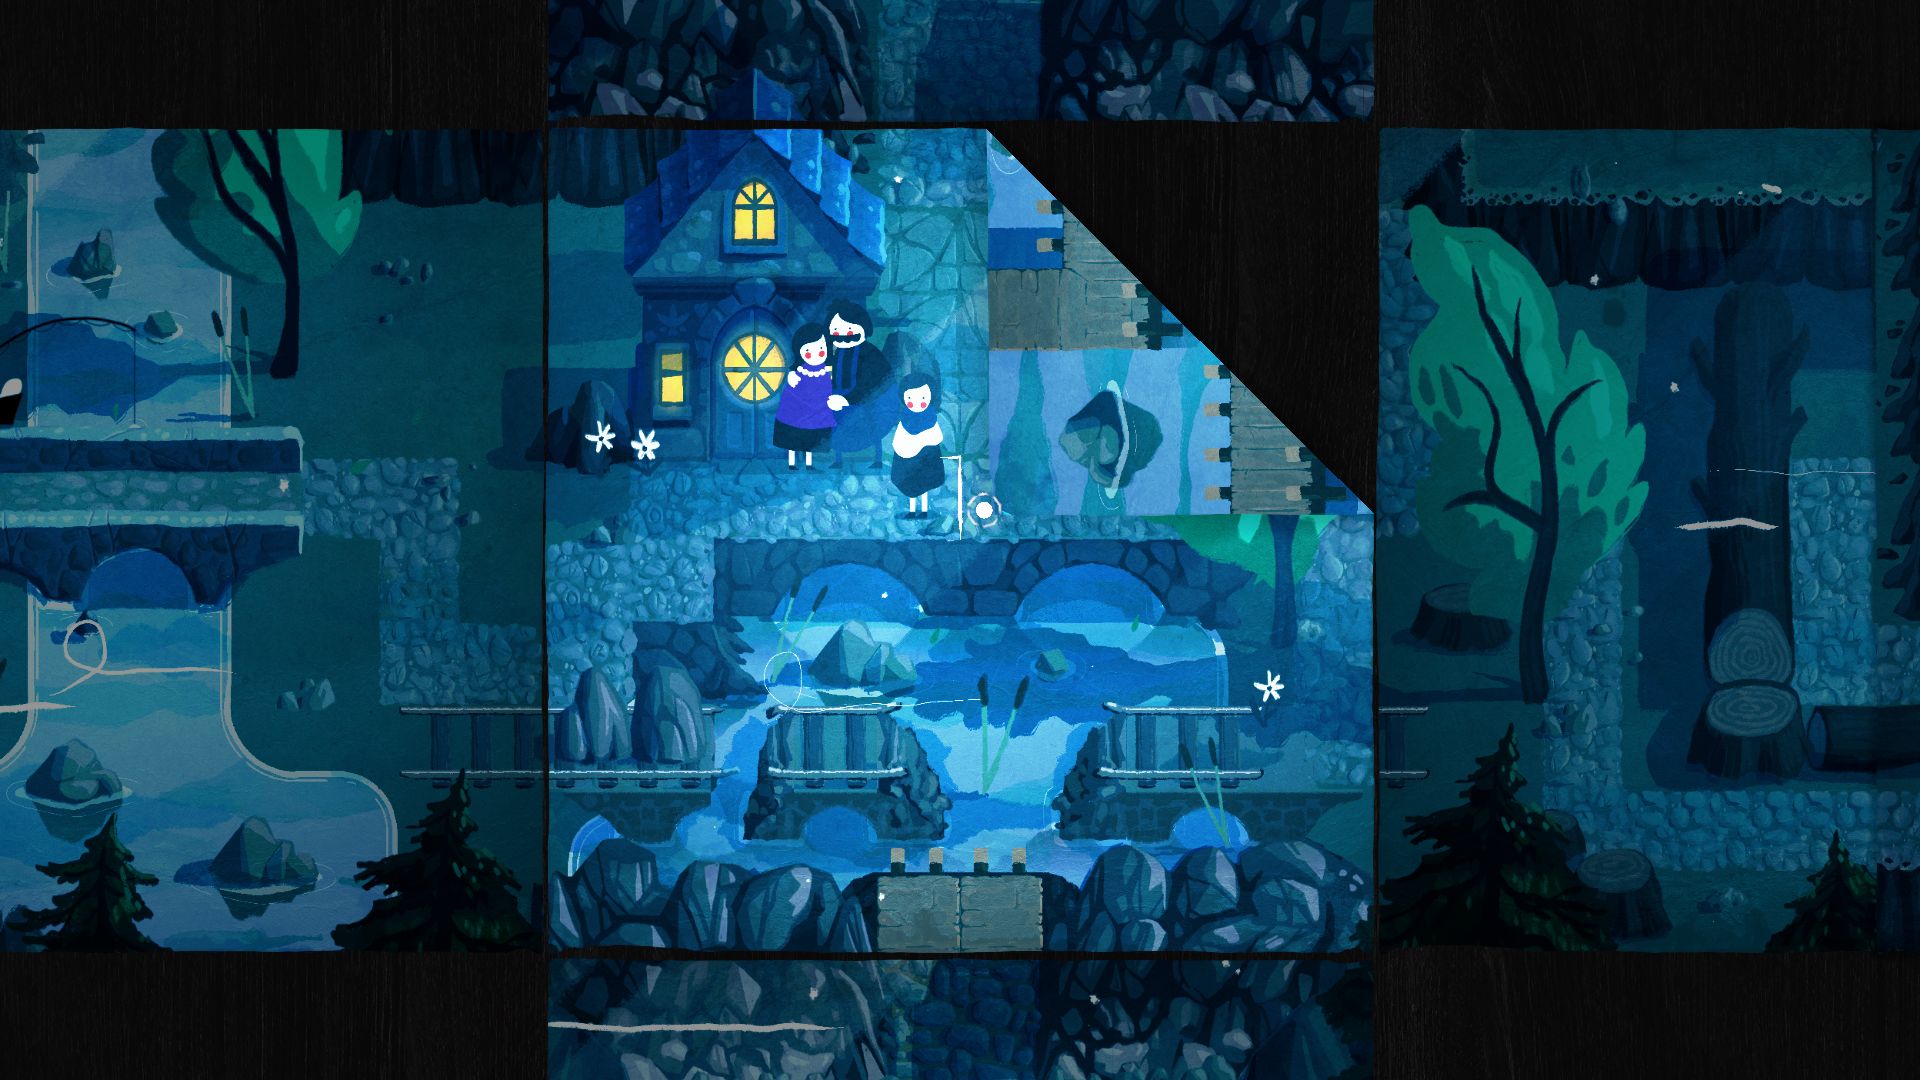 The starting area in 2D world-folding puzzle game Paper Trail, a blue-and-green toned hamlet with your parents standing proudly by a little house